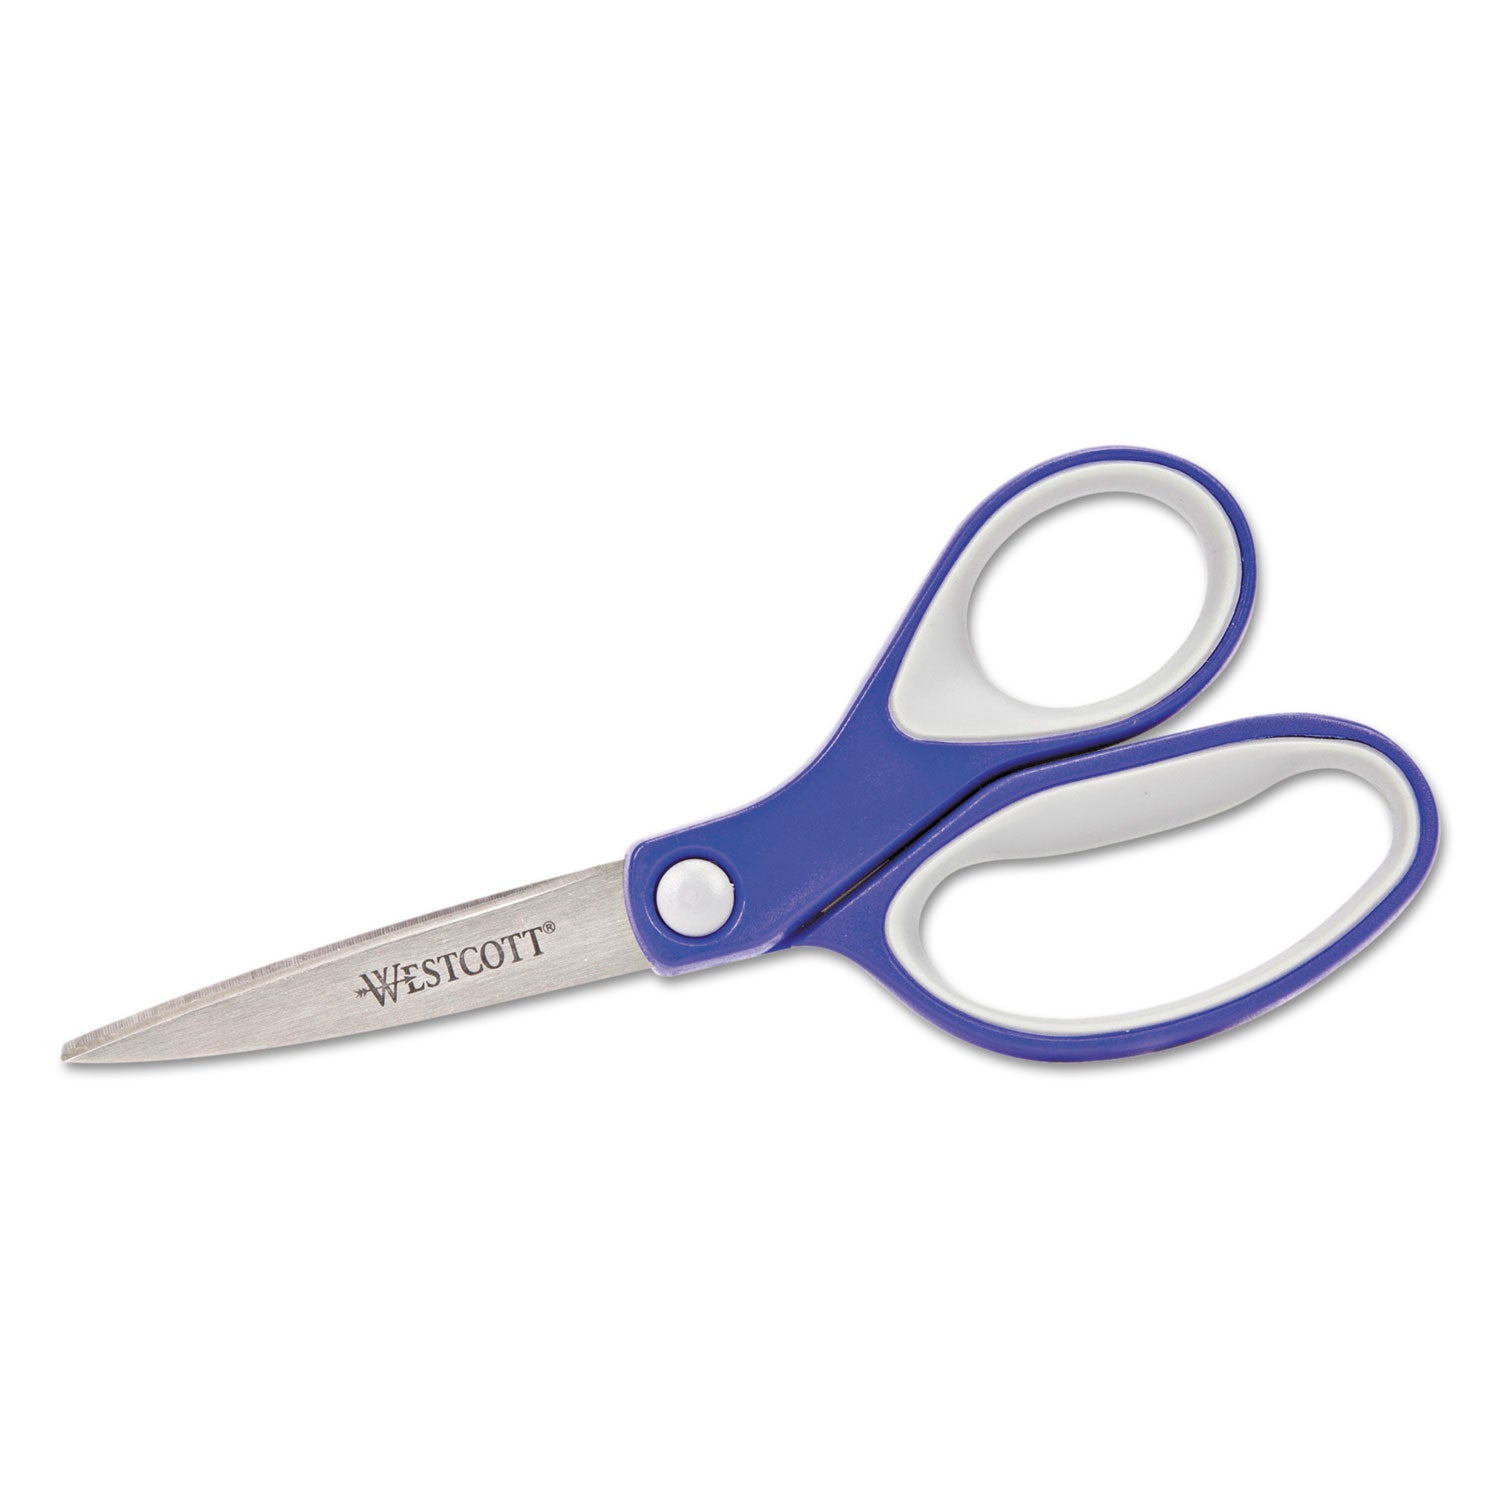 KleenEarth Soft Handle Scissors, Pointed Tip, 7" Long, 2.25" Cut Length, Blue/Gray Straight Handle - 